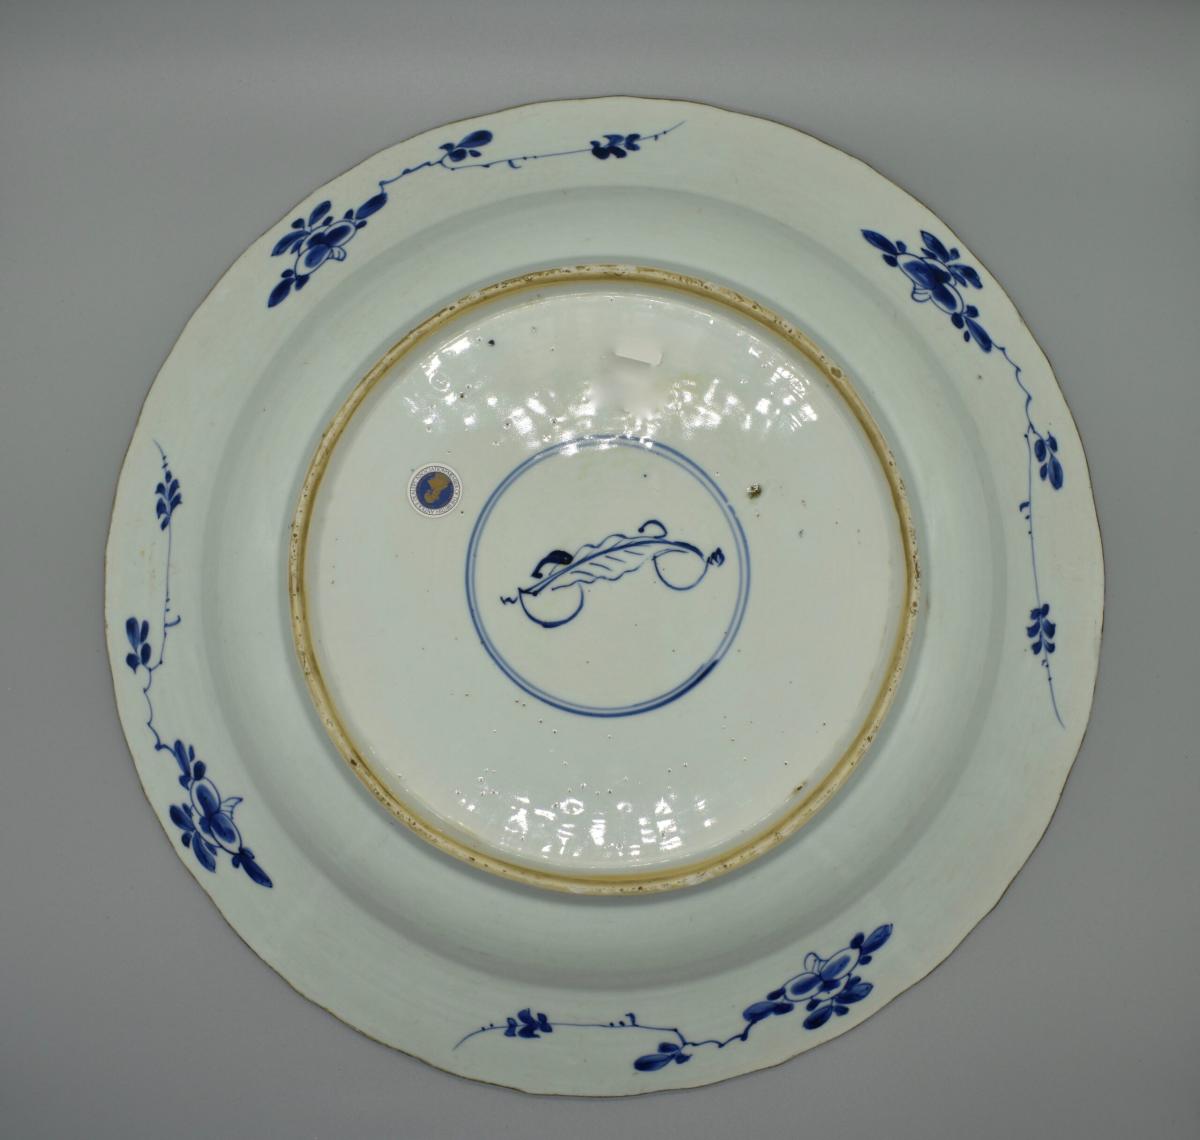 Blue and White Charger, Kangxi period (1661-1722)